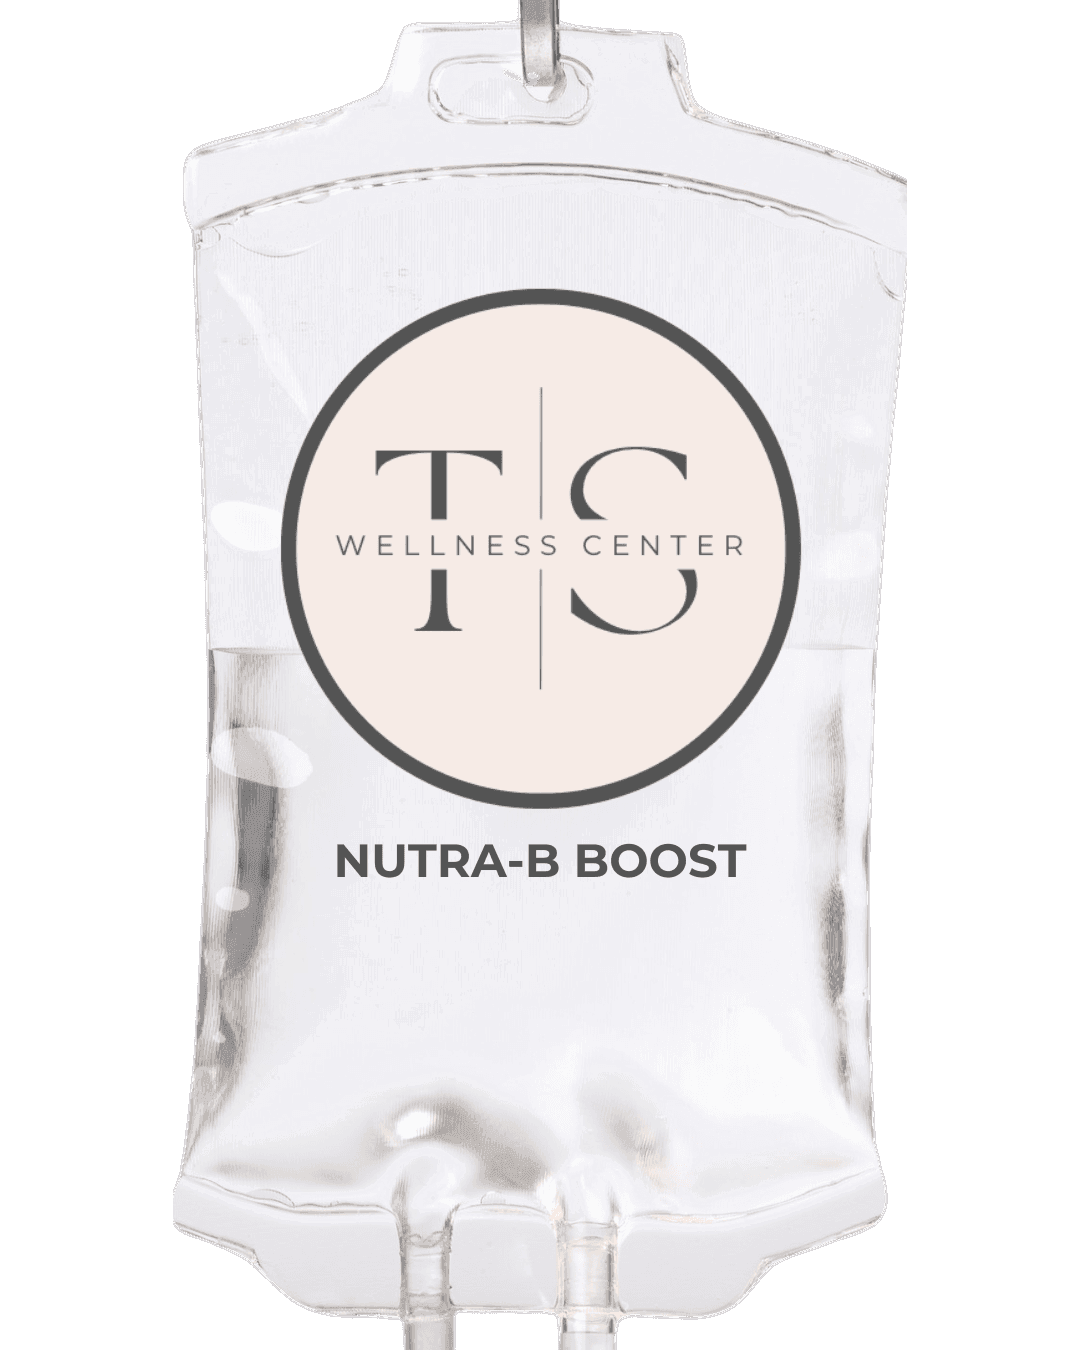 Nutra-B Boost iv infusion tarpon springs wellness center